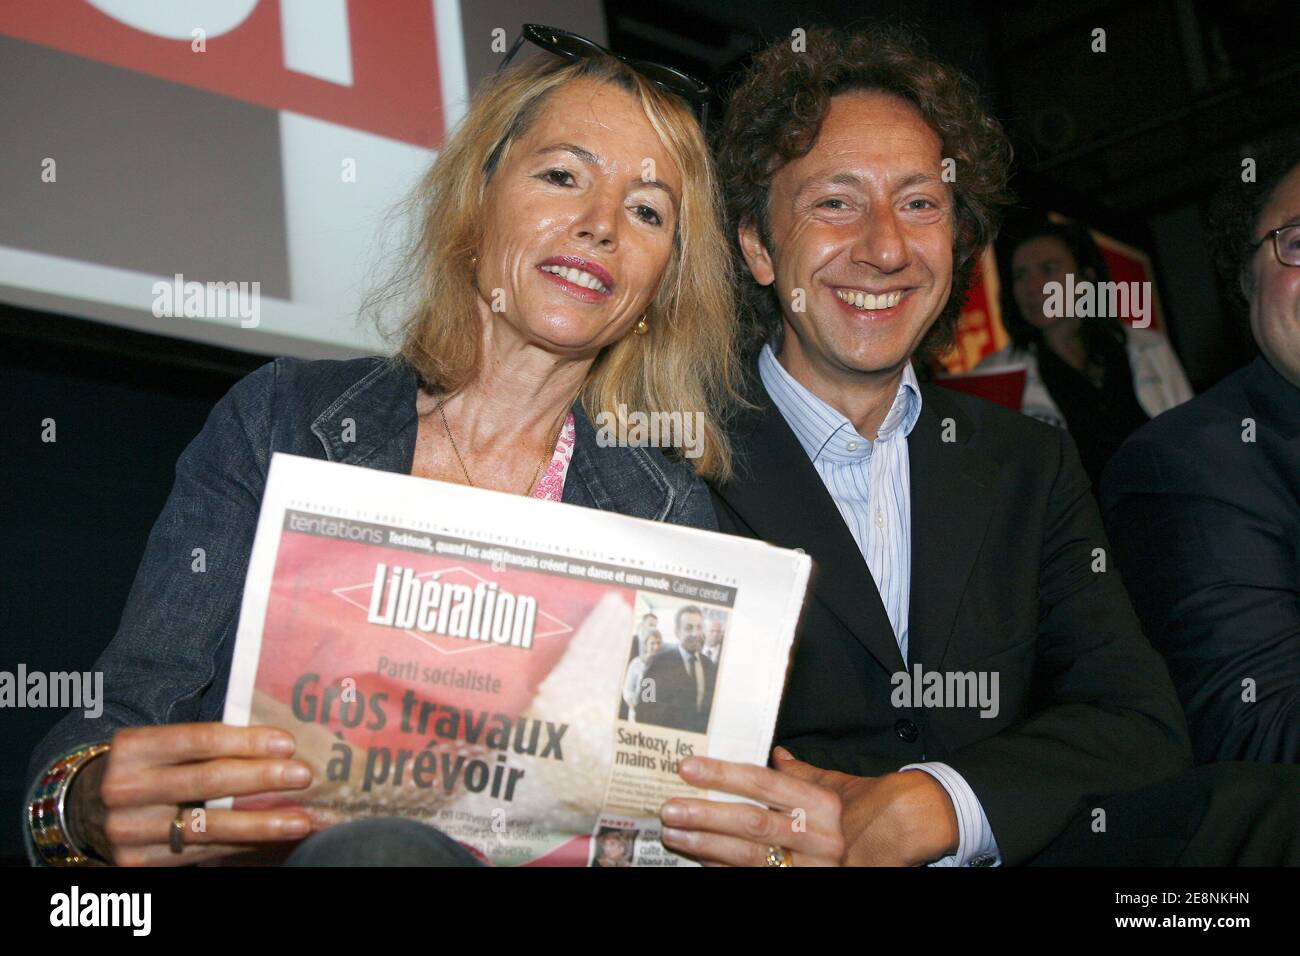 Laure Adler and Stephane Bern attend the annual press conference of French radio  station France Inter held at the Maison de la Radio in Paris, France on  August 31, 2007. Photo by